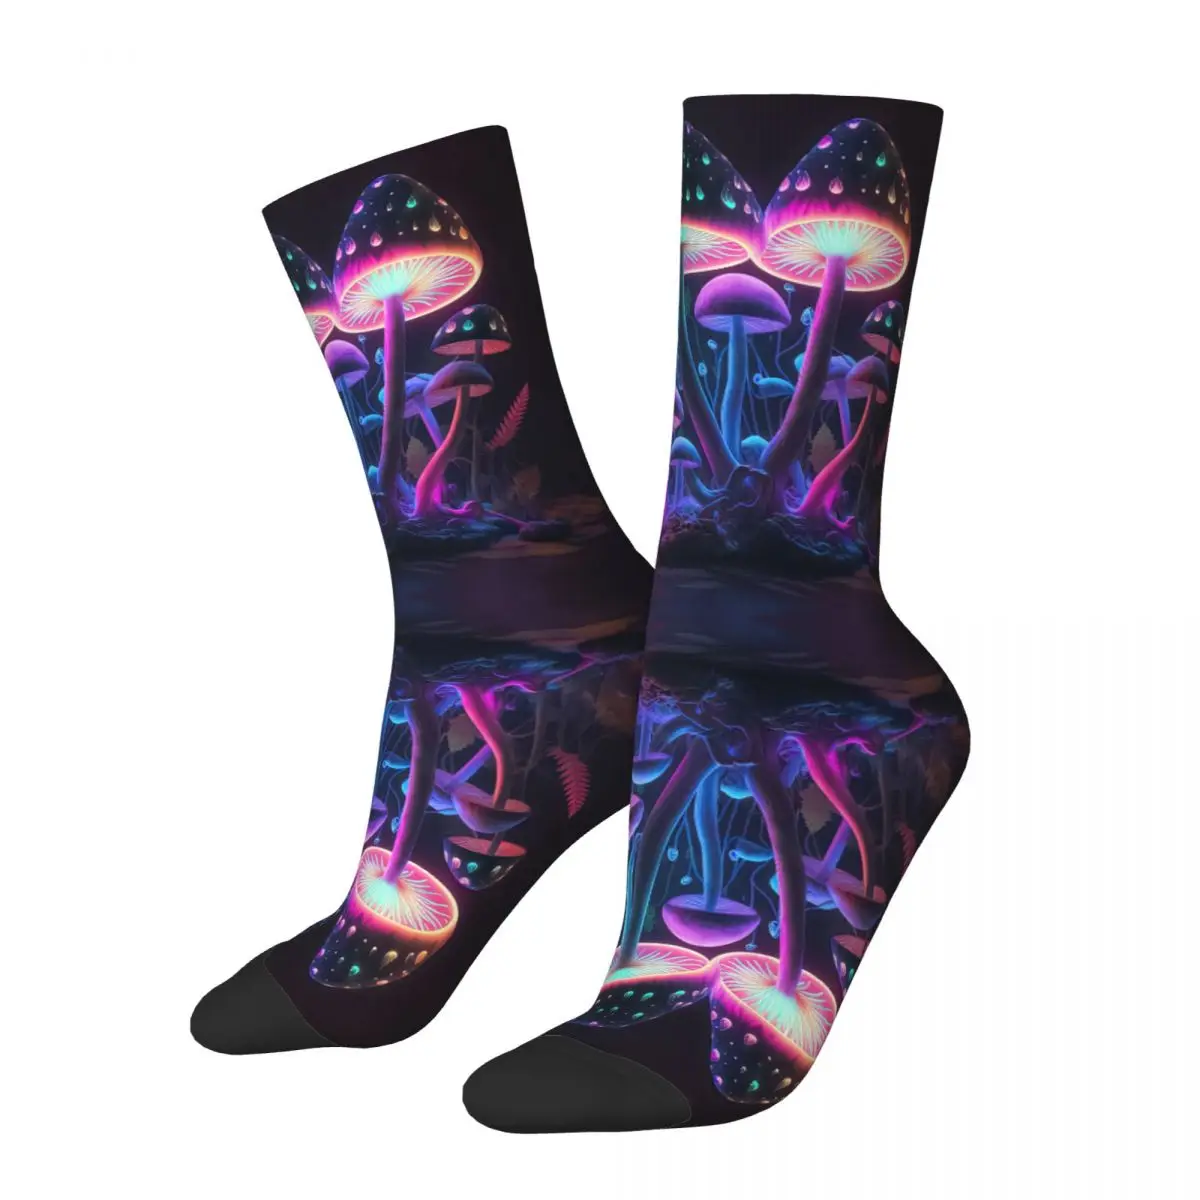 

Neon Psychodelic Mushrooms Stuff Men Women Socks Motion Applicable throughout the year Dressing Gifts